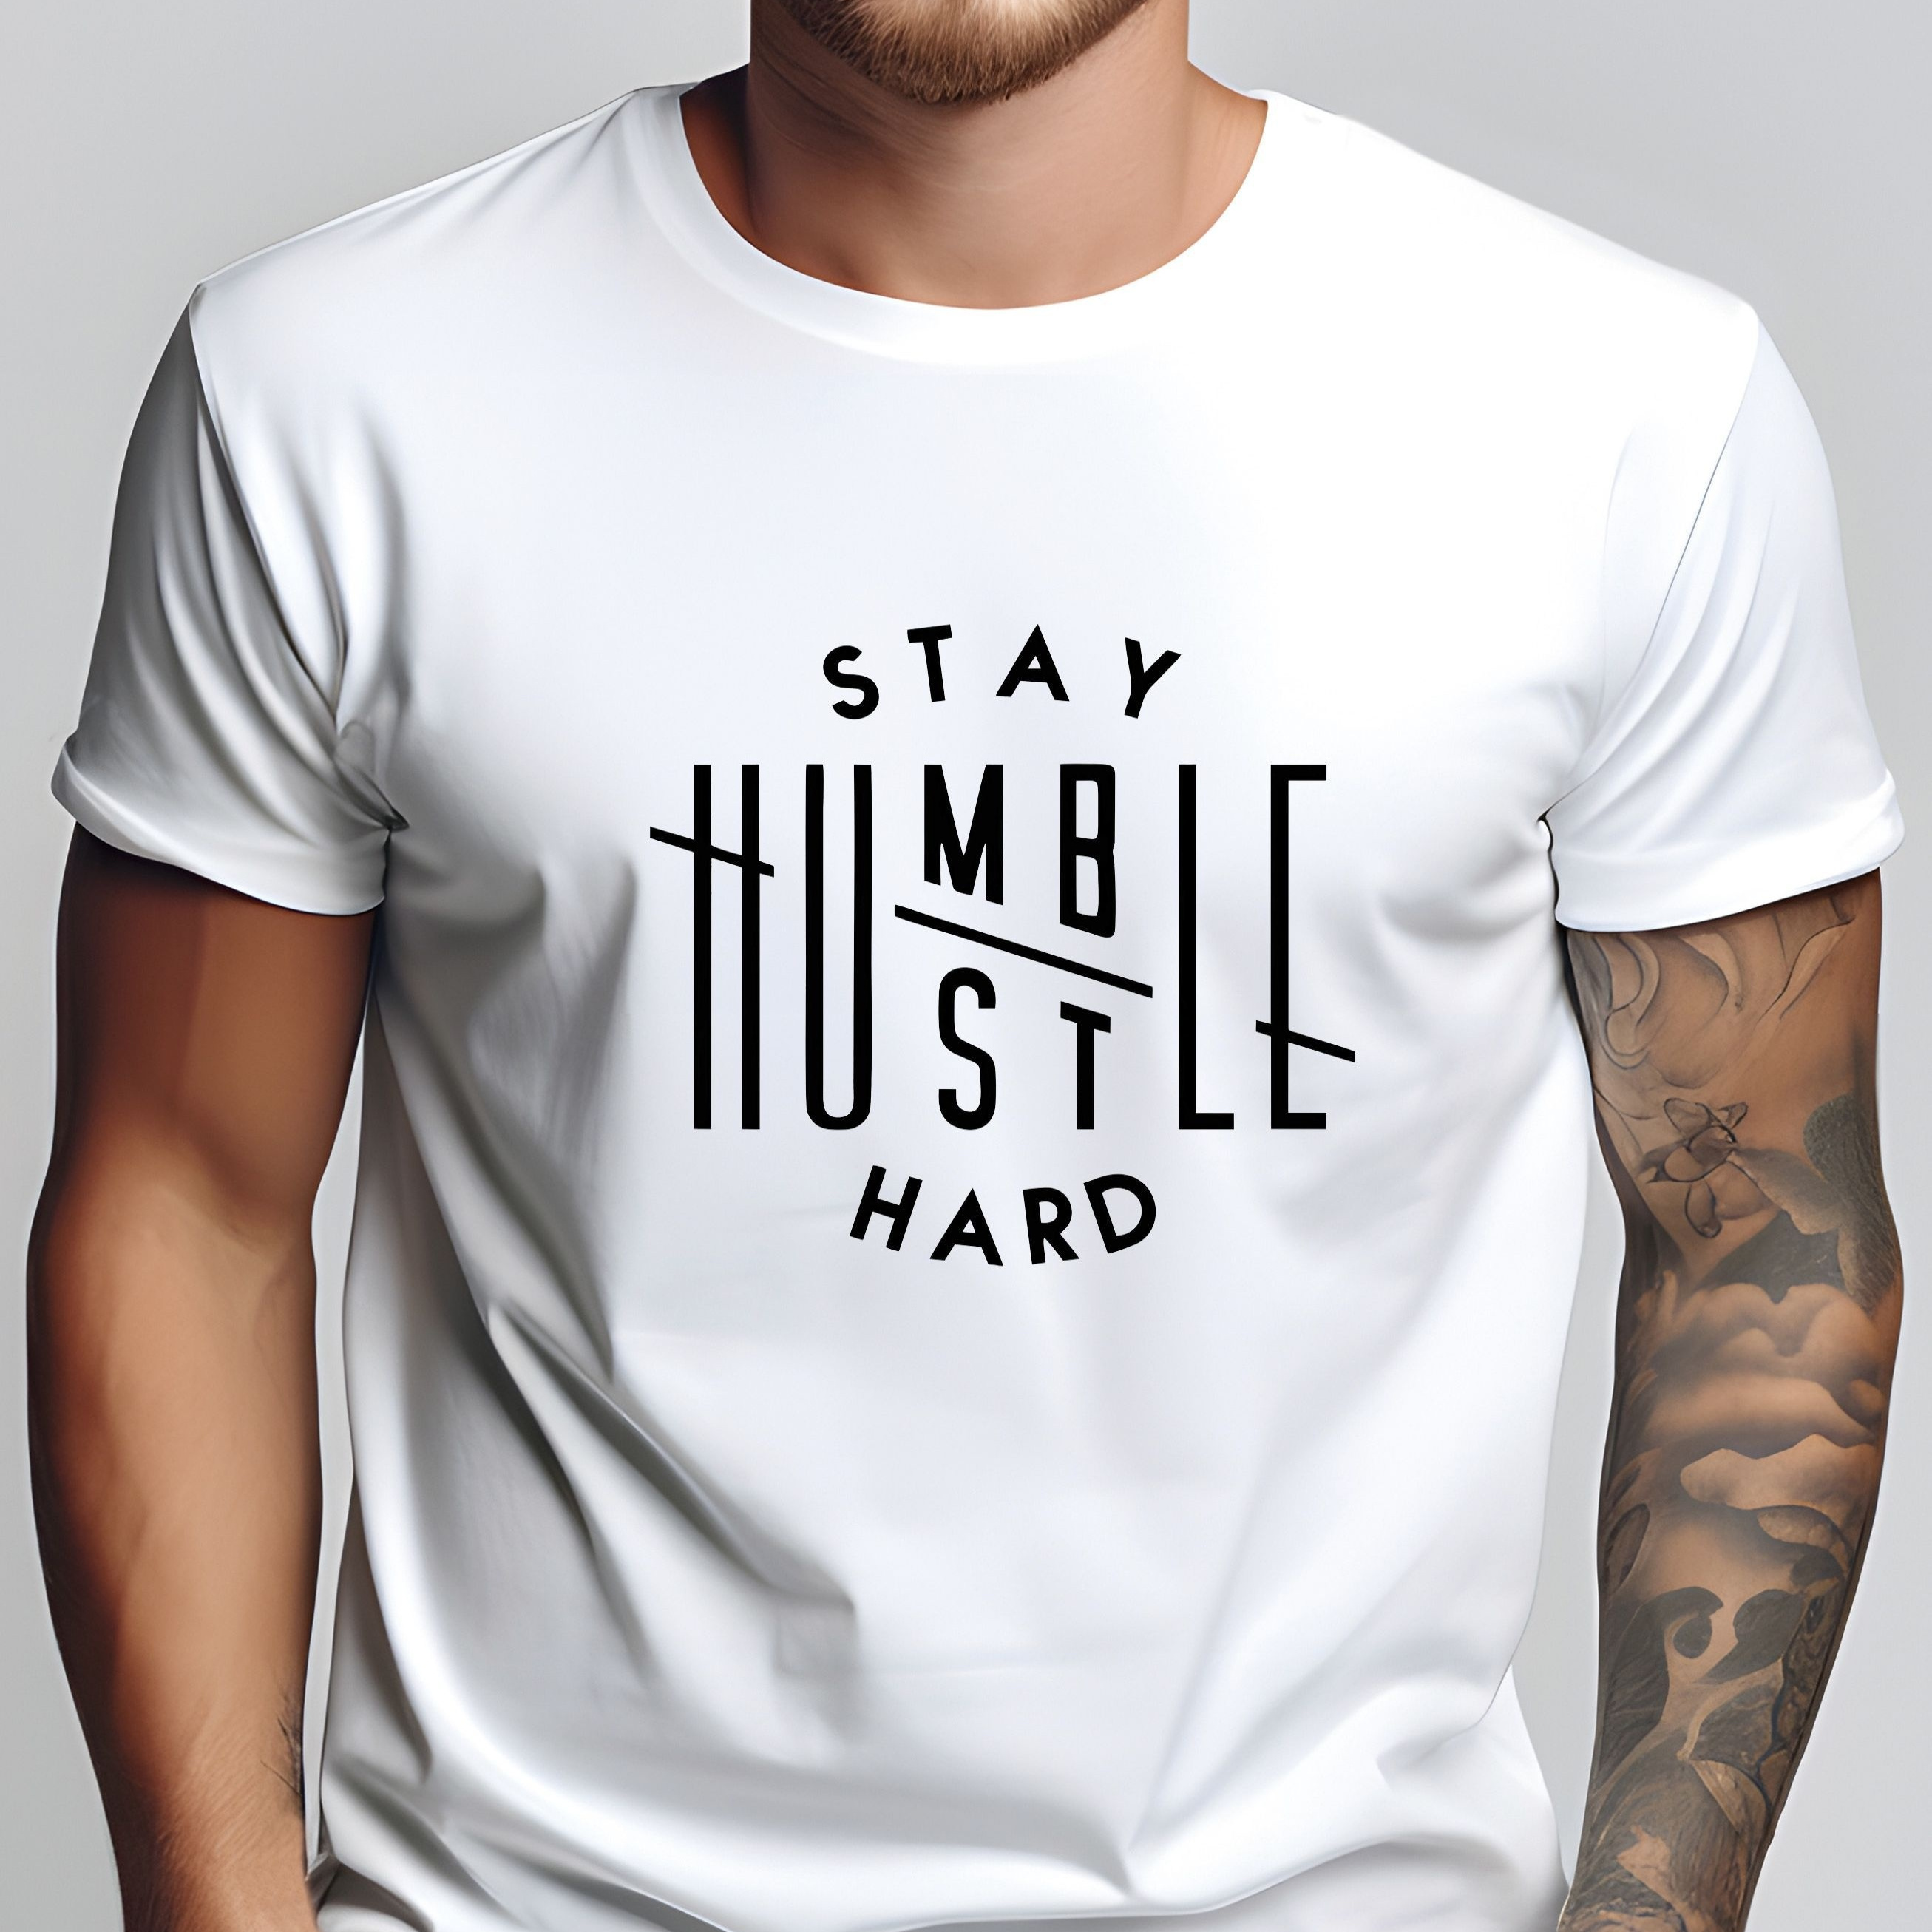 

Stay Humble Hustle Hard Print Tee Shirt, Tees For Men, Casual Short Sleeve T-shirt For Summer